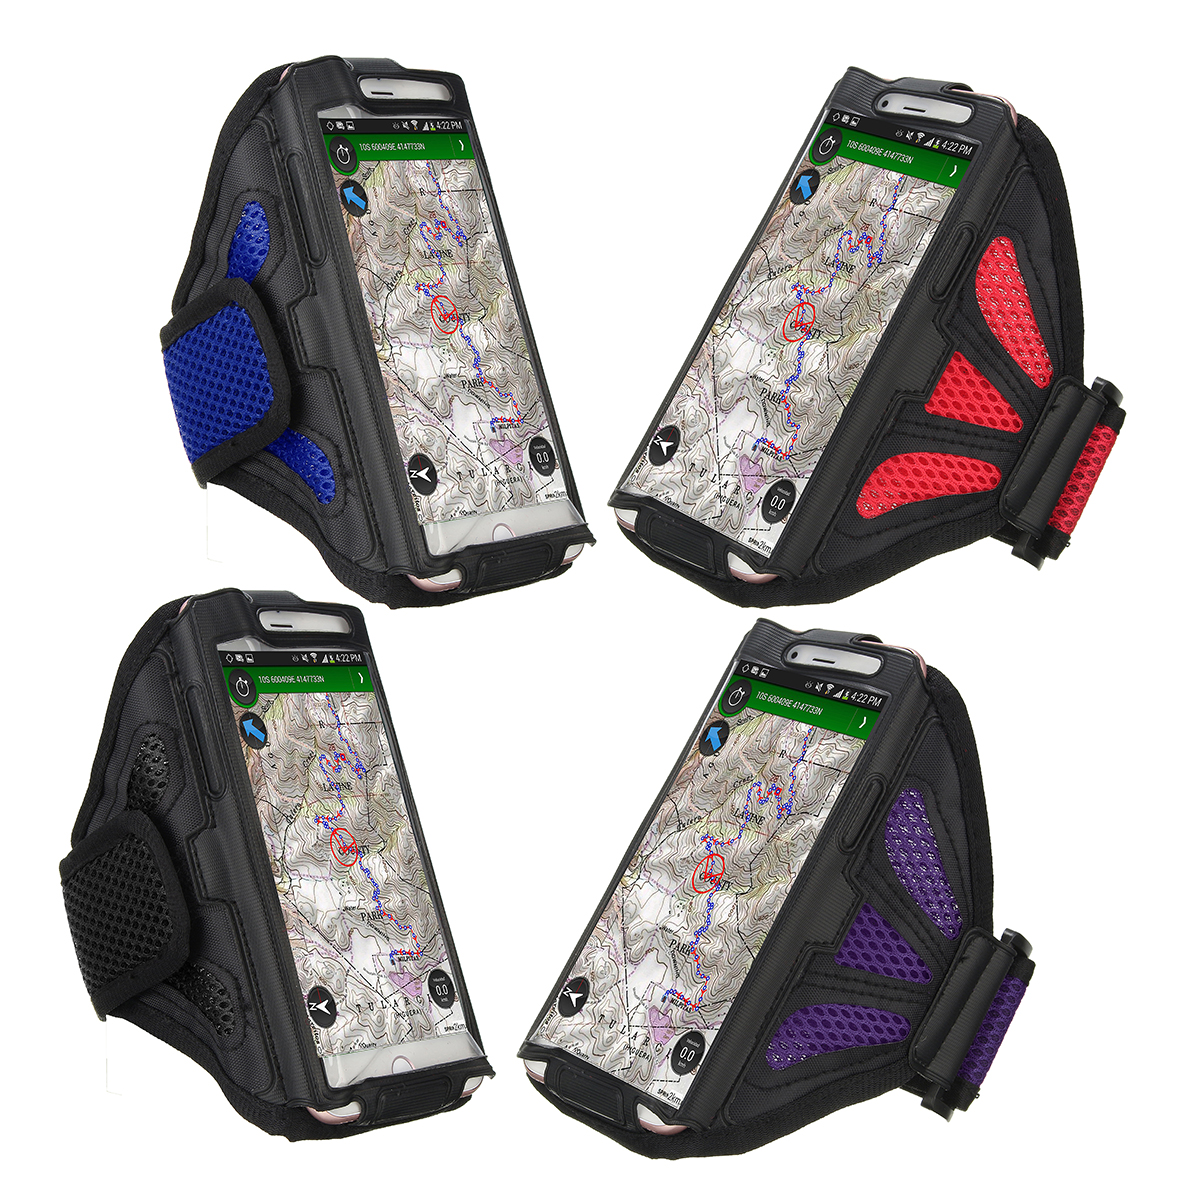 Gym-Sports-Running-Bag-Jogging-Armband-Case-Cover-Phone-Bag-for-under-55-inches-Cell-Phone-1135933